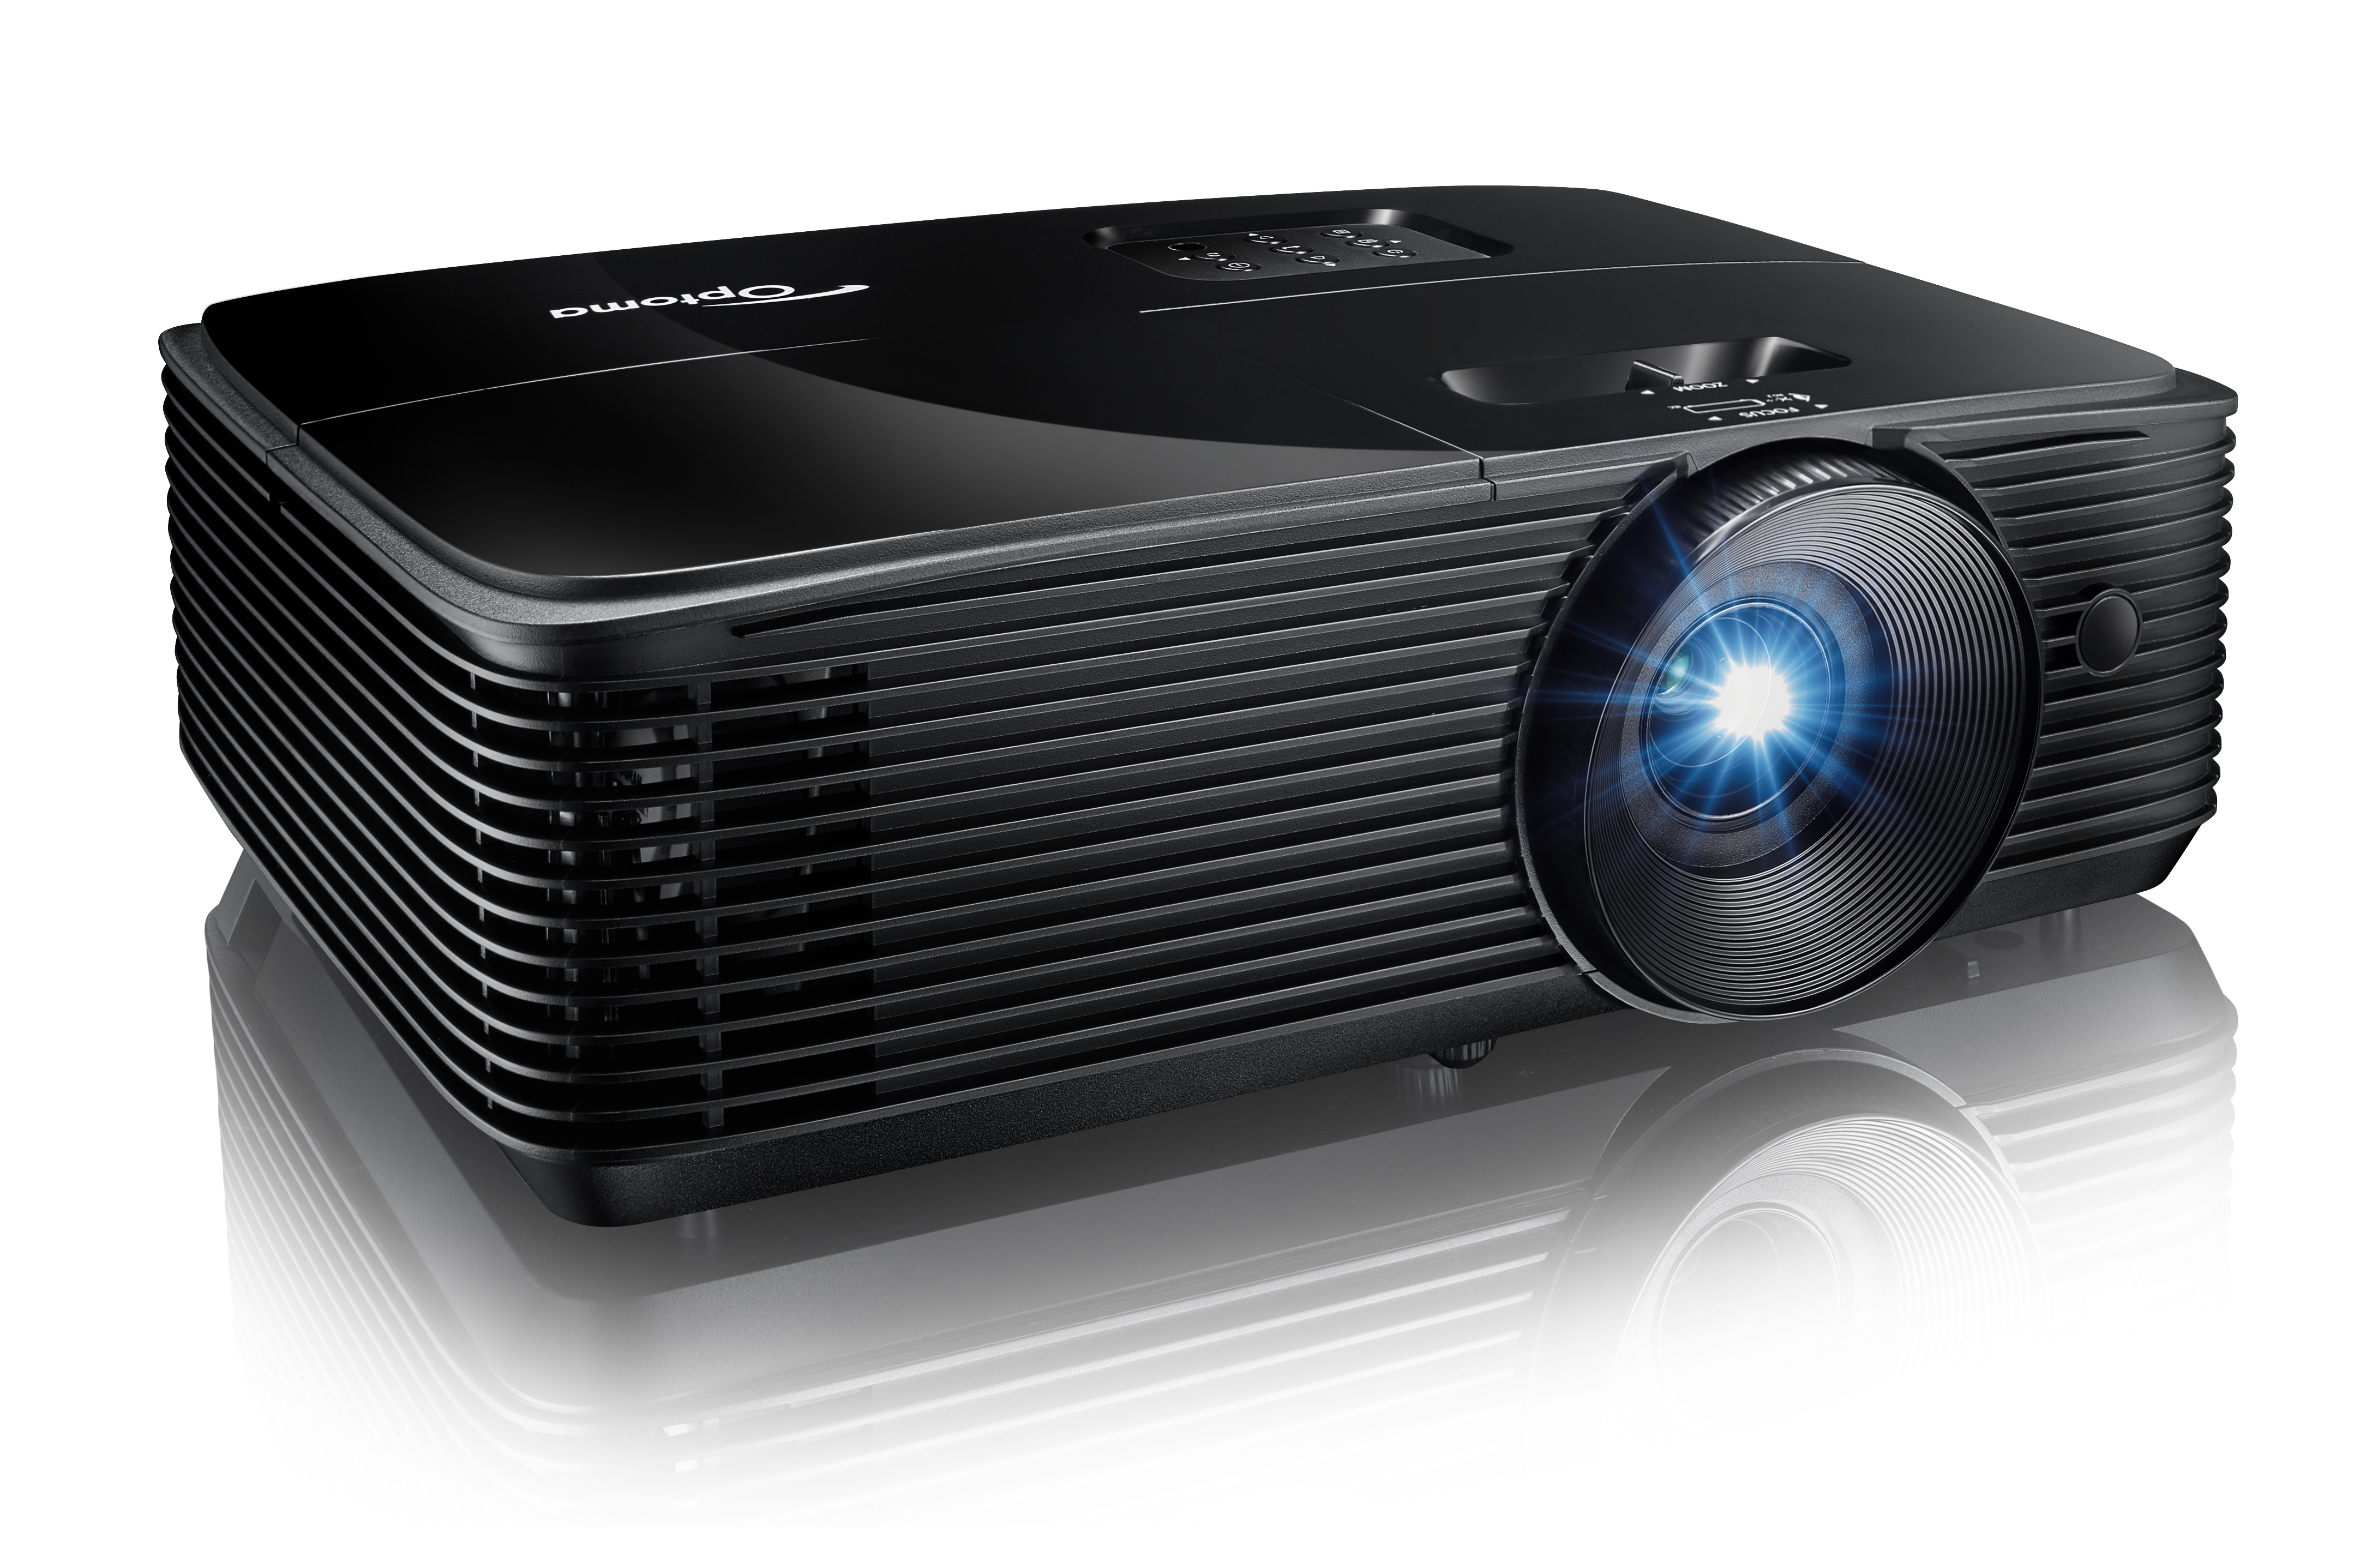 HD146X Full HD 1080p Vibrant Home Theater Projector for Movies and Gaming, 3600 Lumens - image 2 of 9